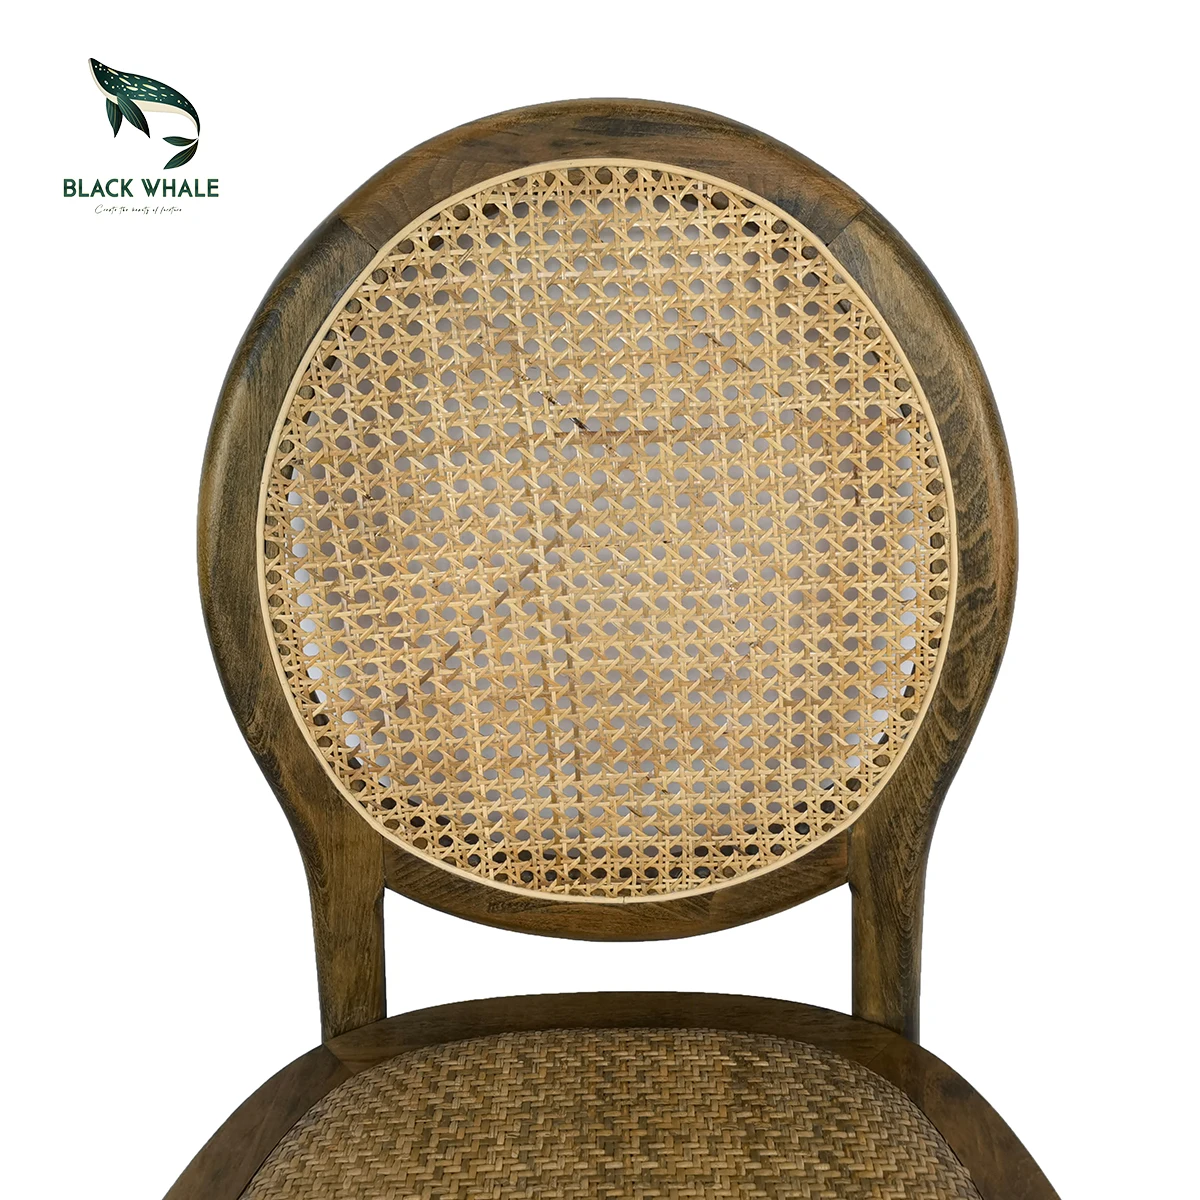 Suppliers Cafe Stackable Banquet Dinner Sillas De Comedor Cafeteria Hotel Wood Antique Cane Rattan Dining Room Restaurant Chairs